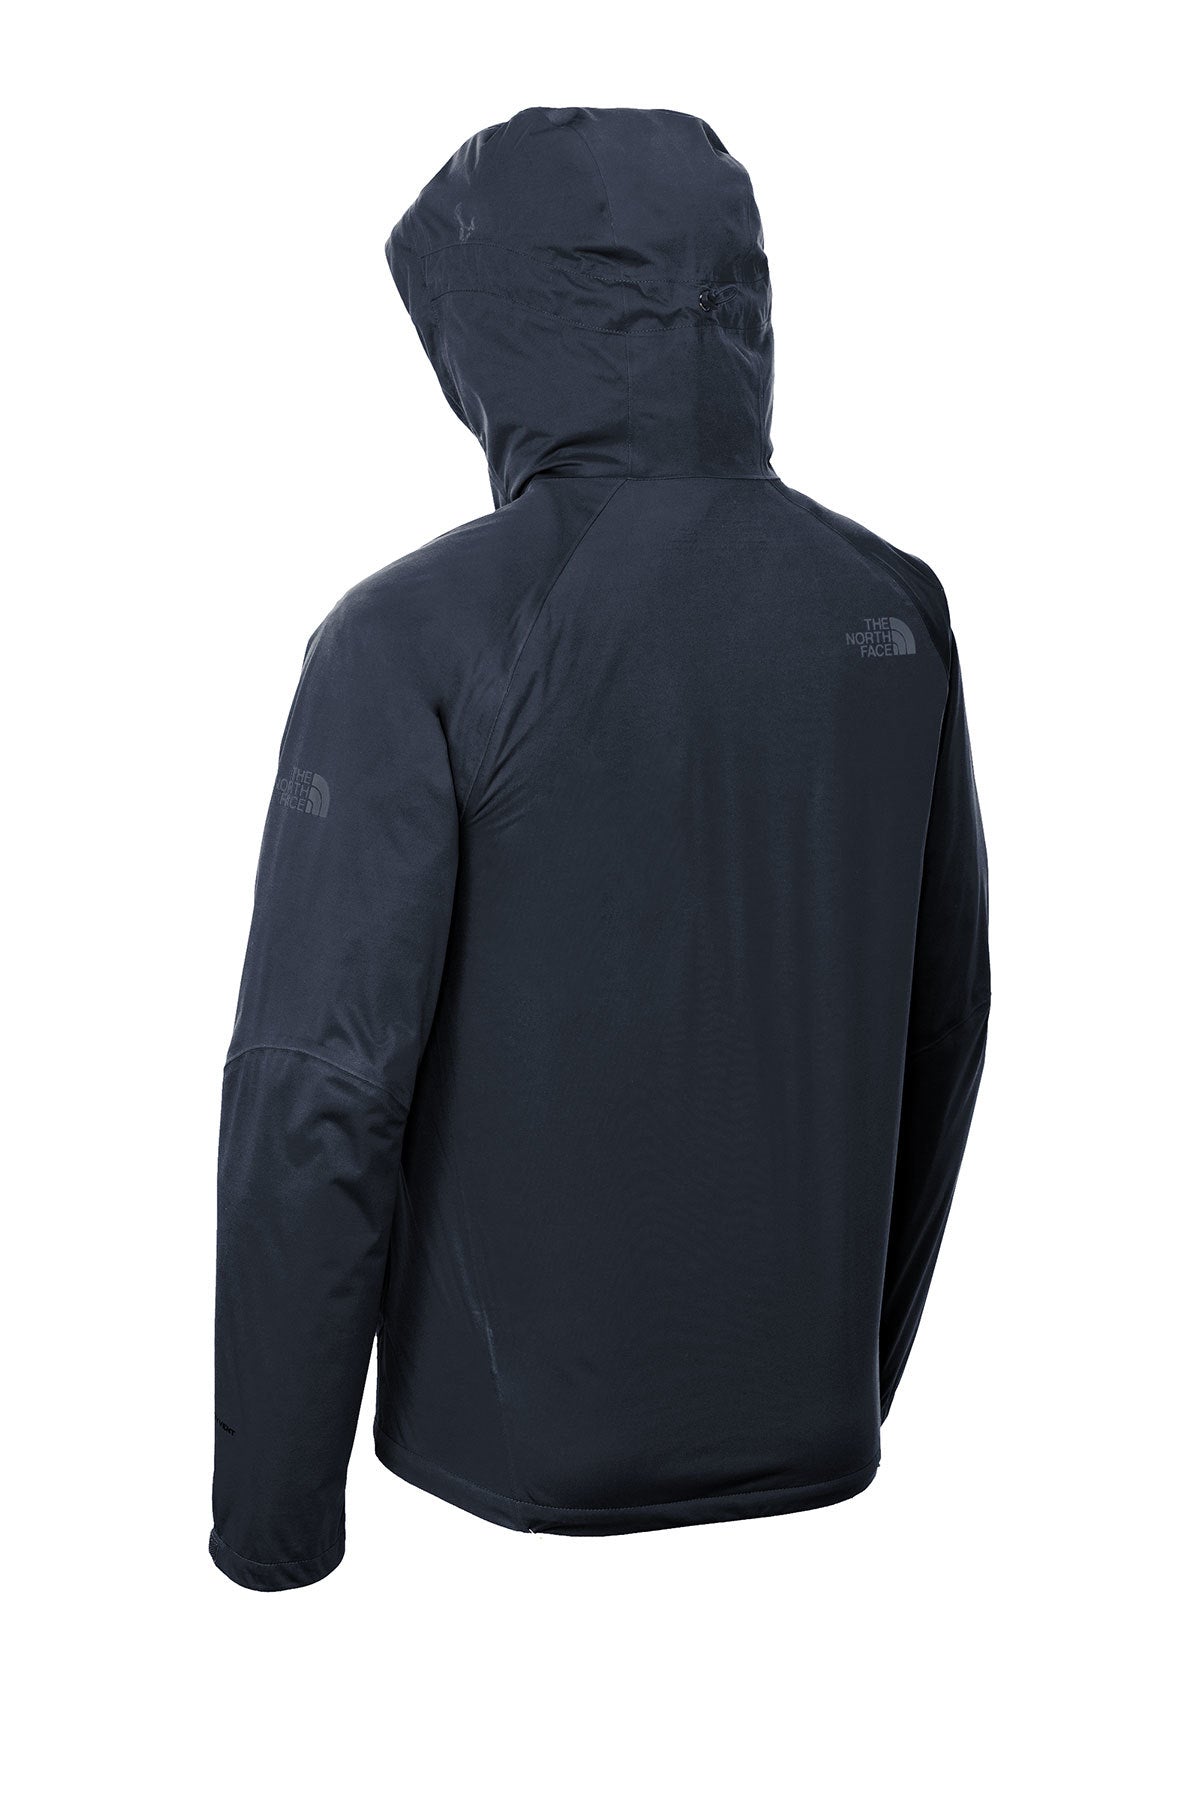 vervorming opwinding schild The North Face ® All-Weather DryVent ™ Stretch Jacket – SolutionHealth